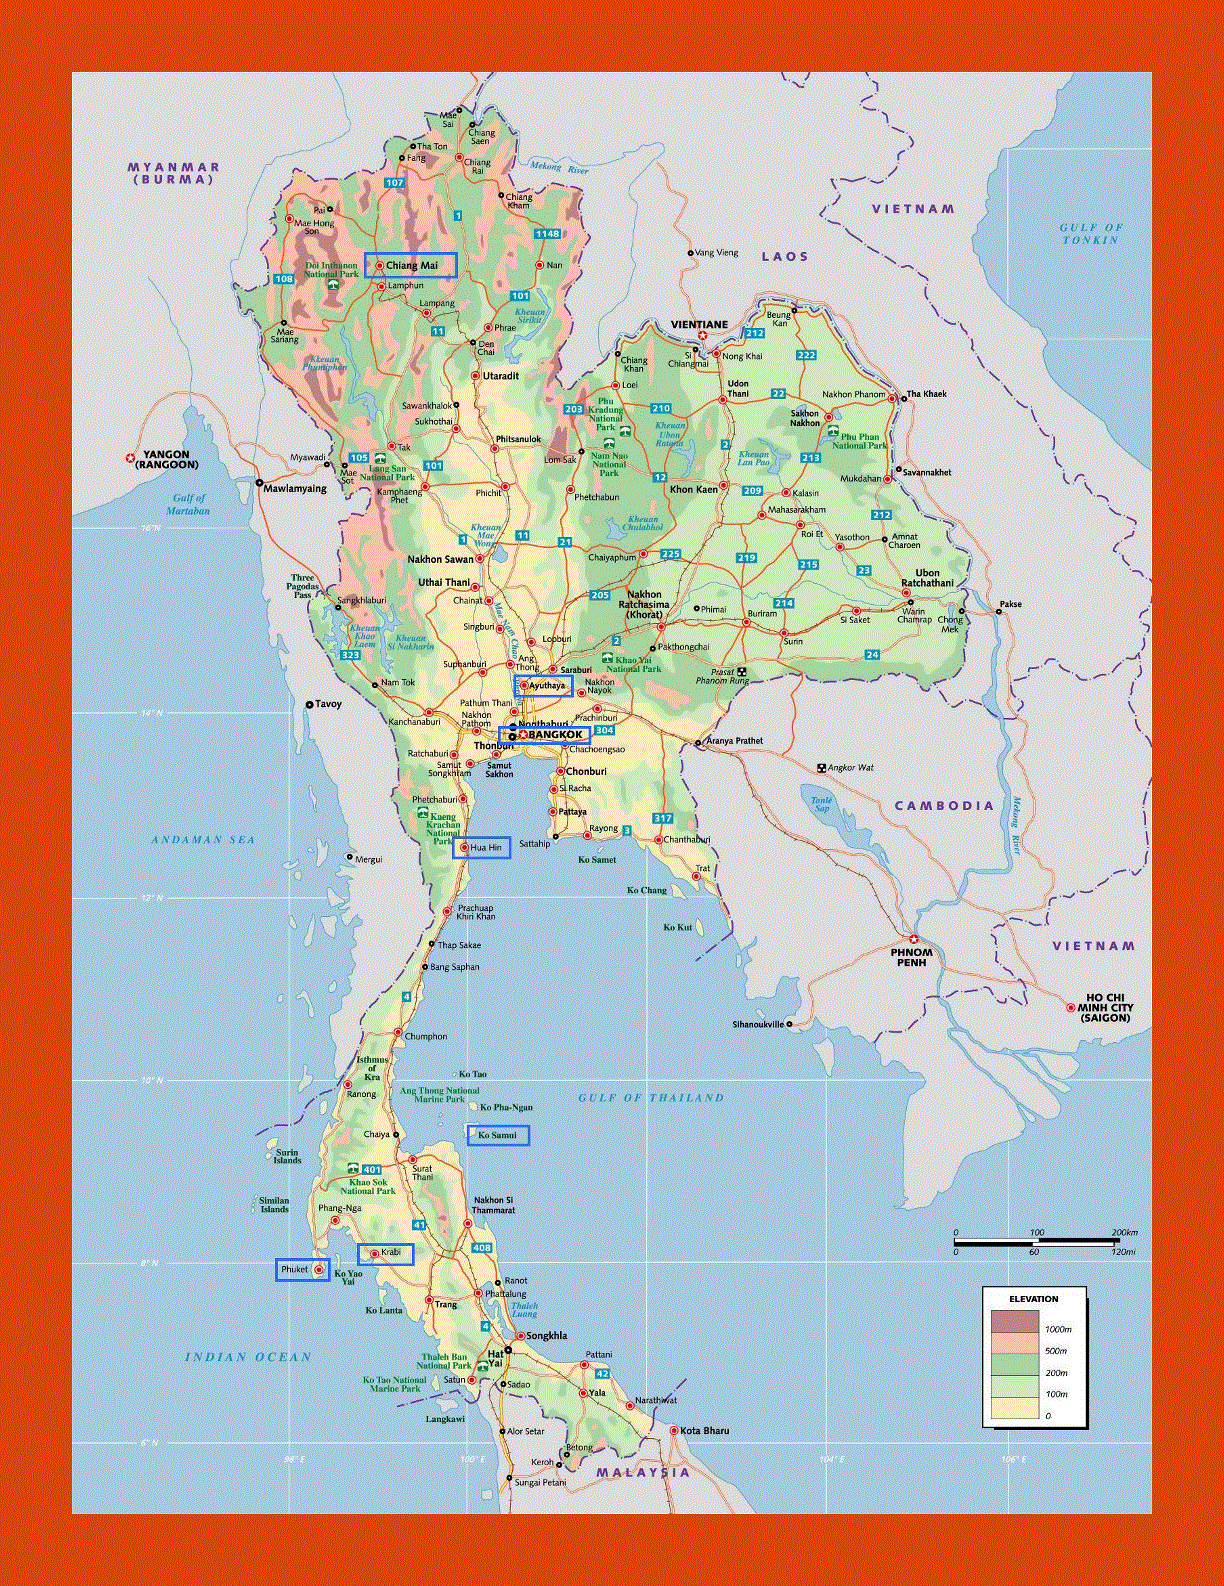 Elevation map of Thailand